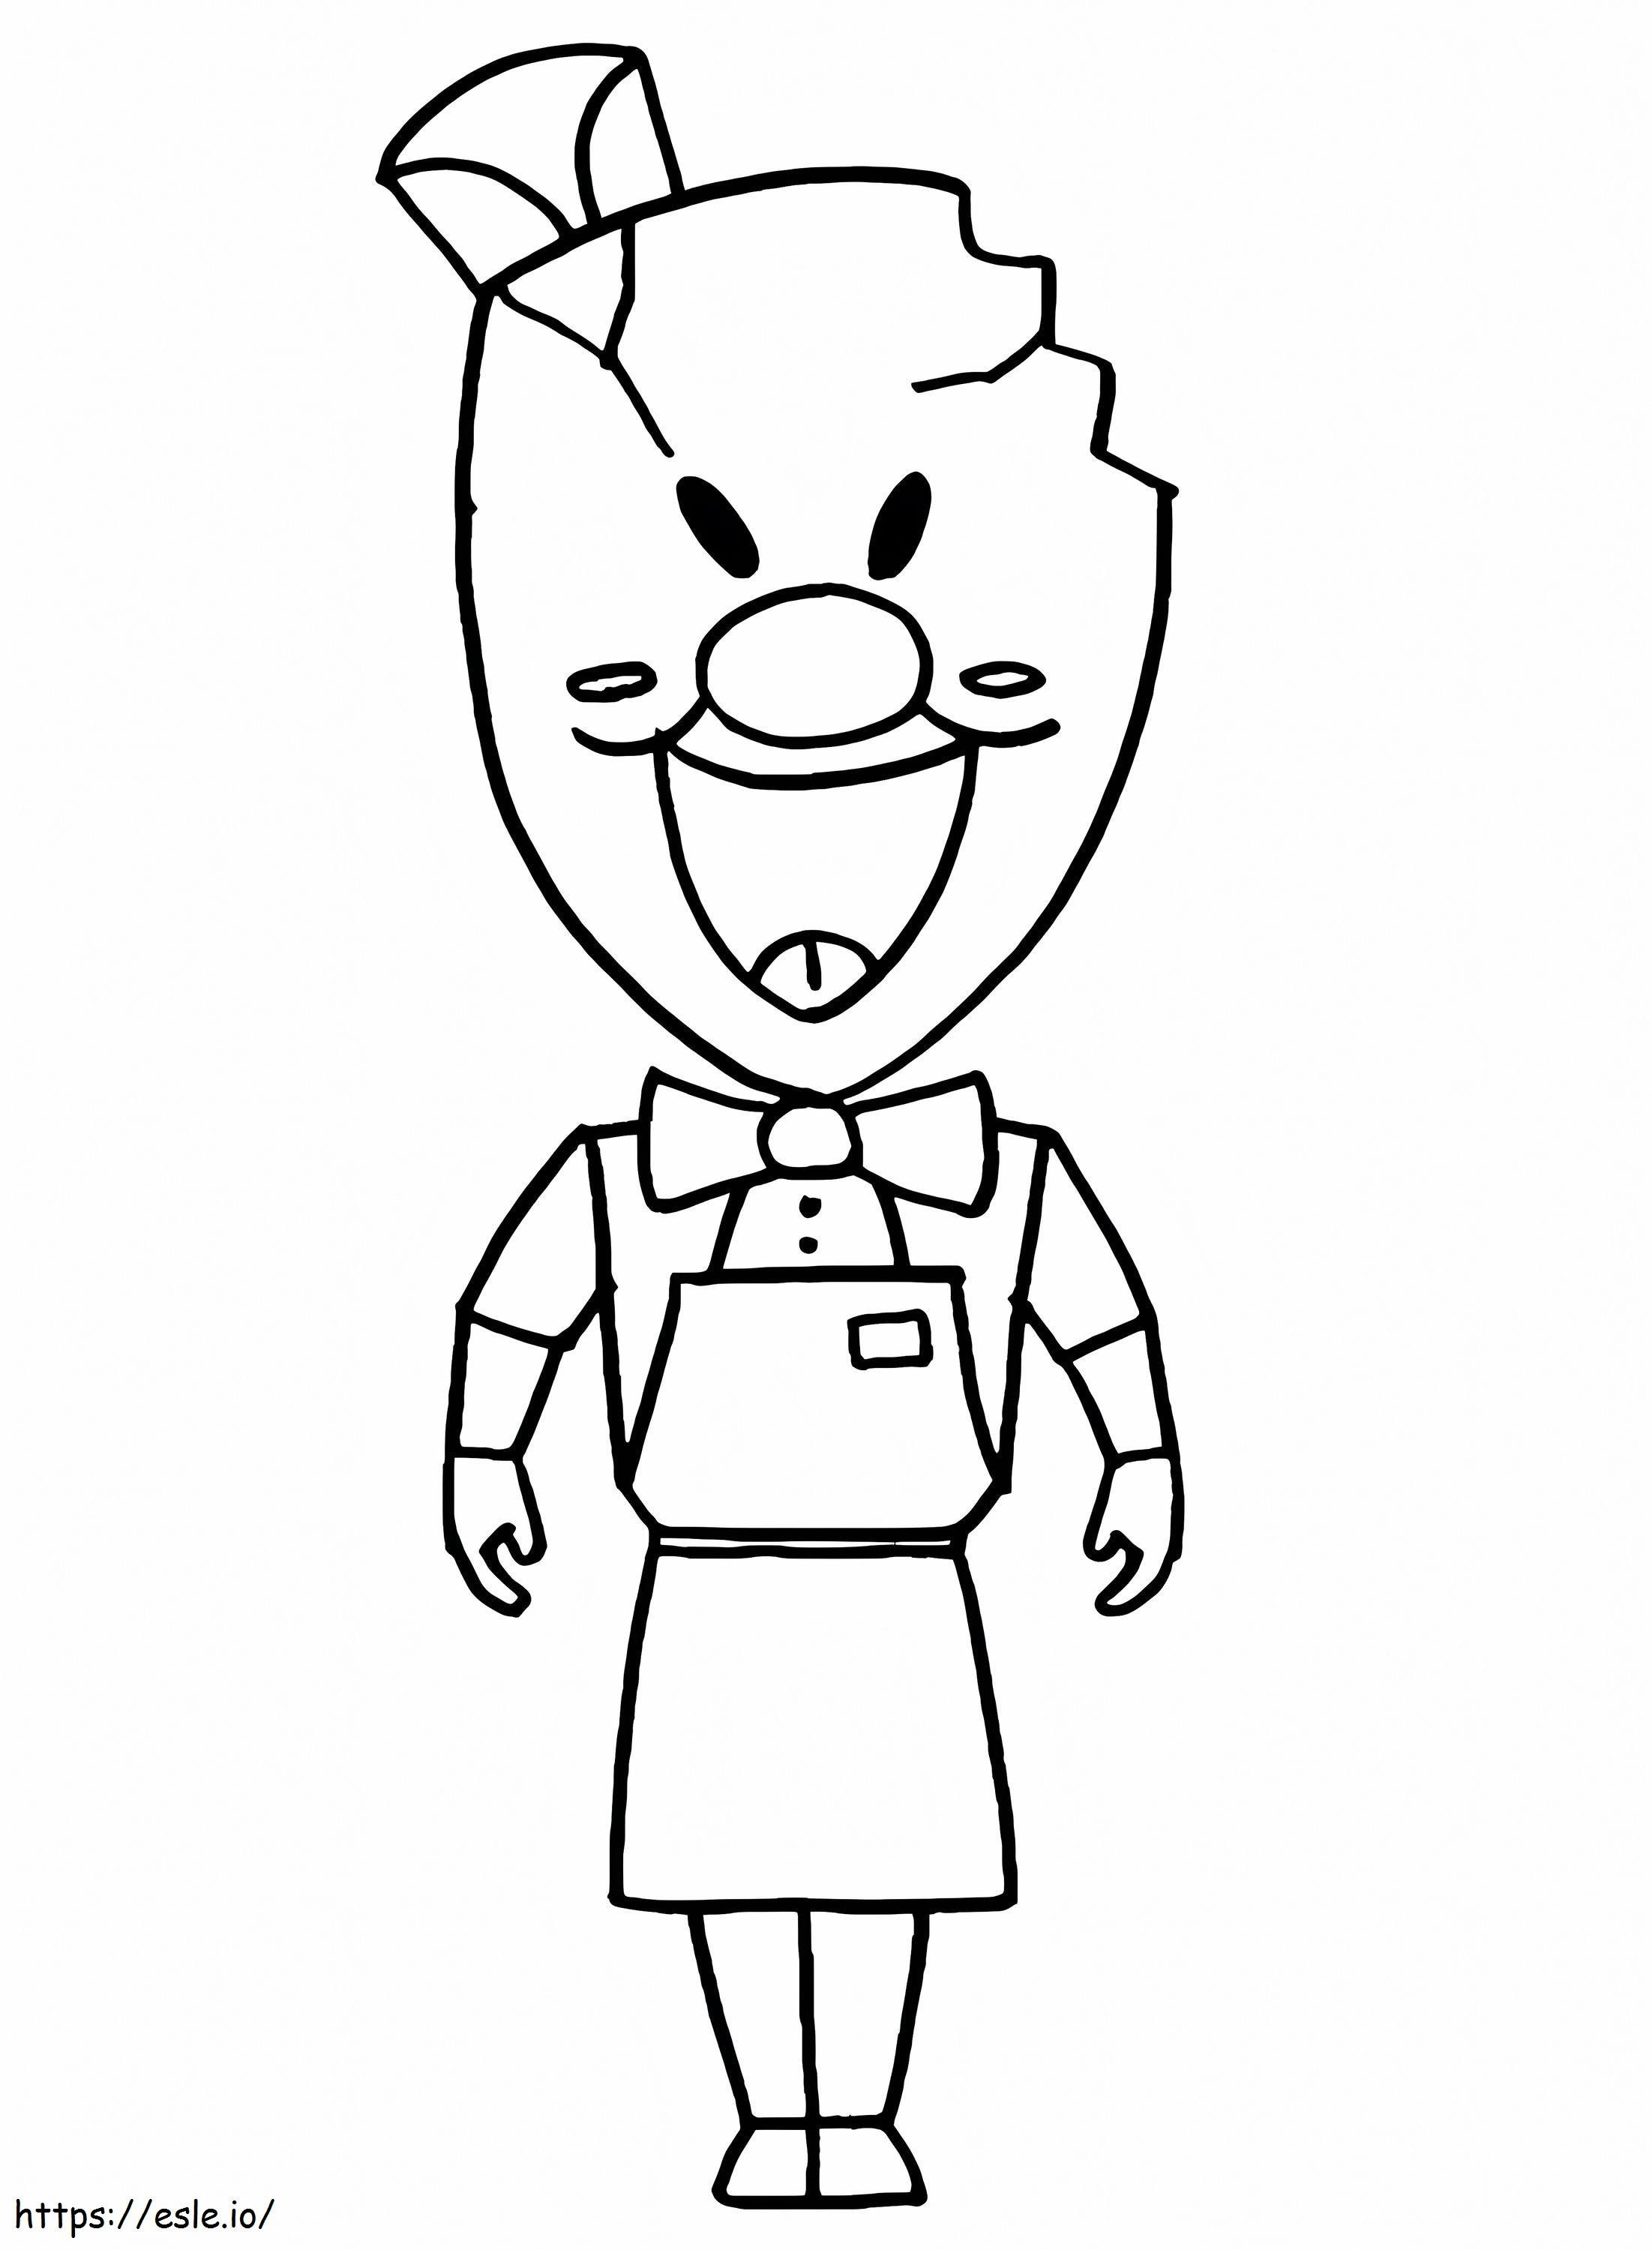 Print Rod Ice Scream coloring page